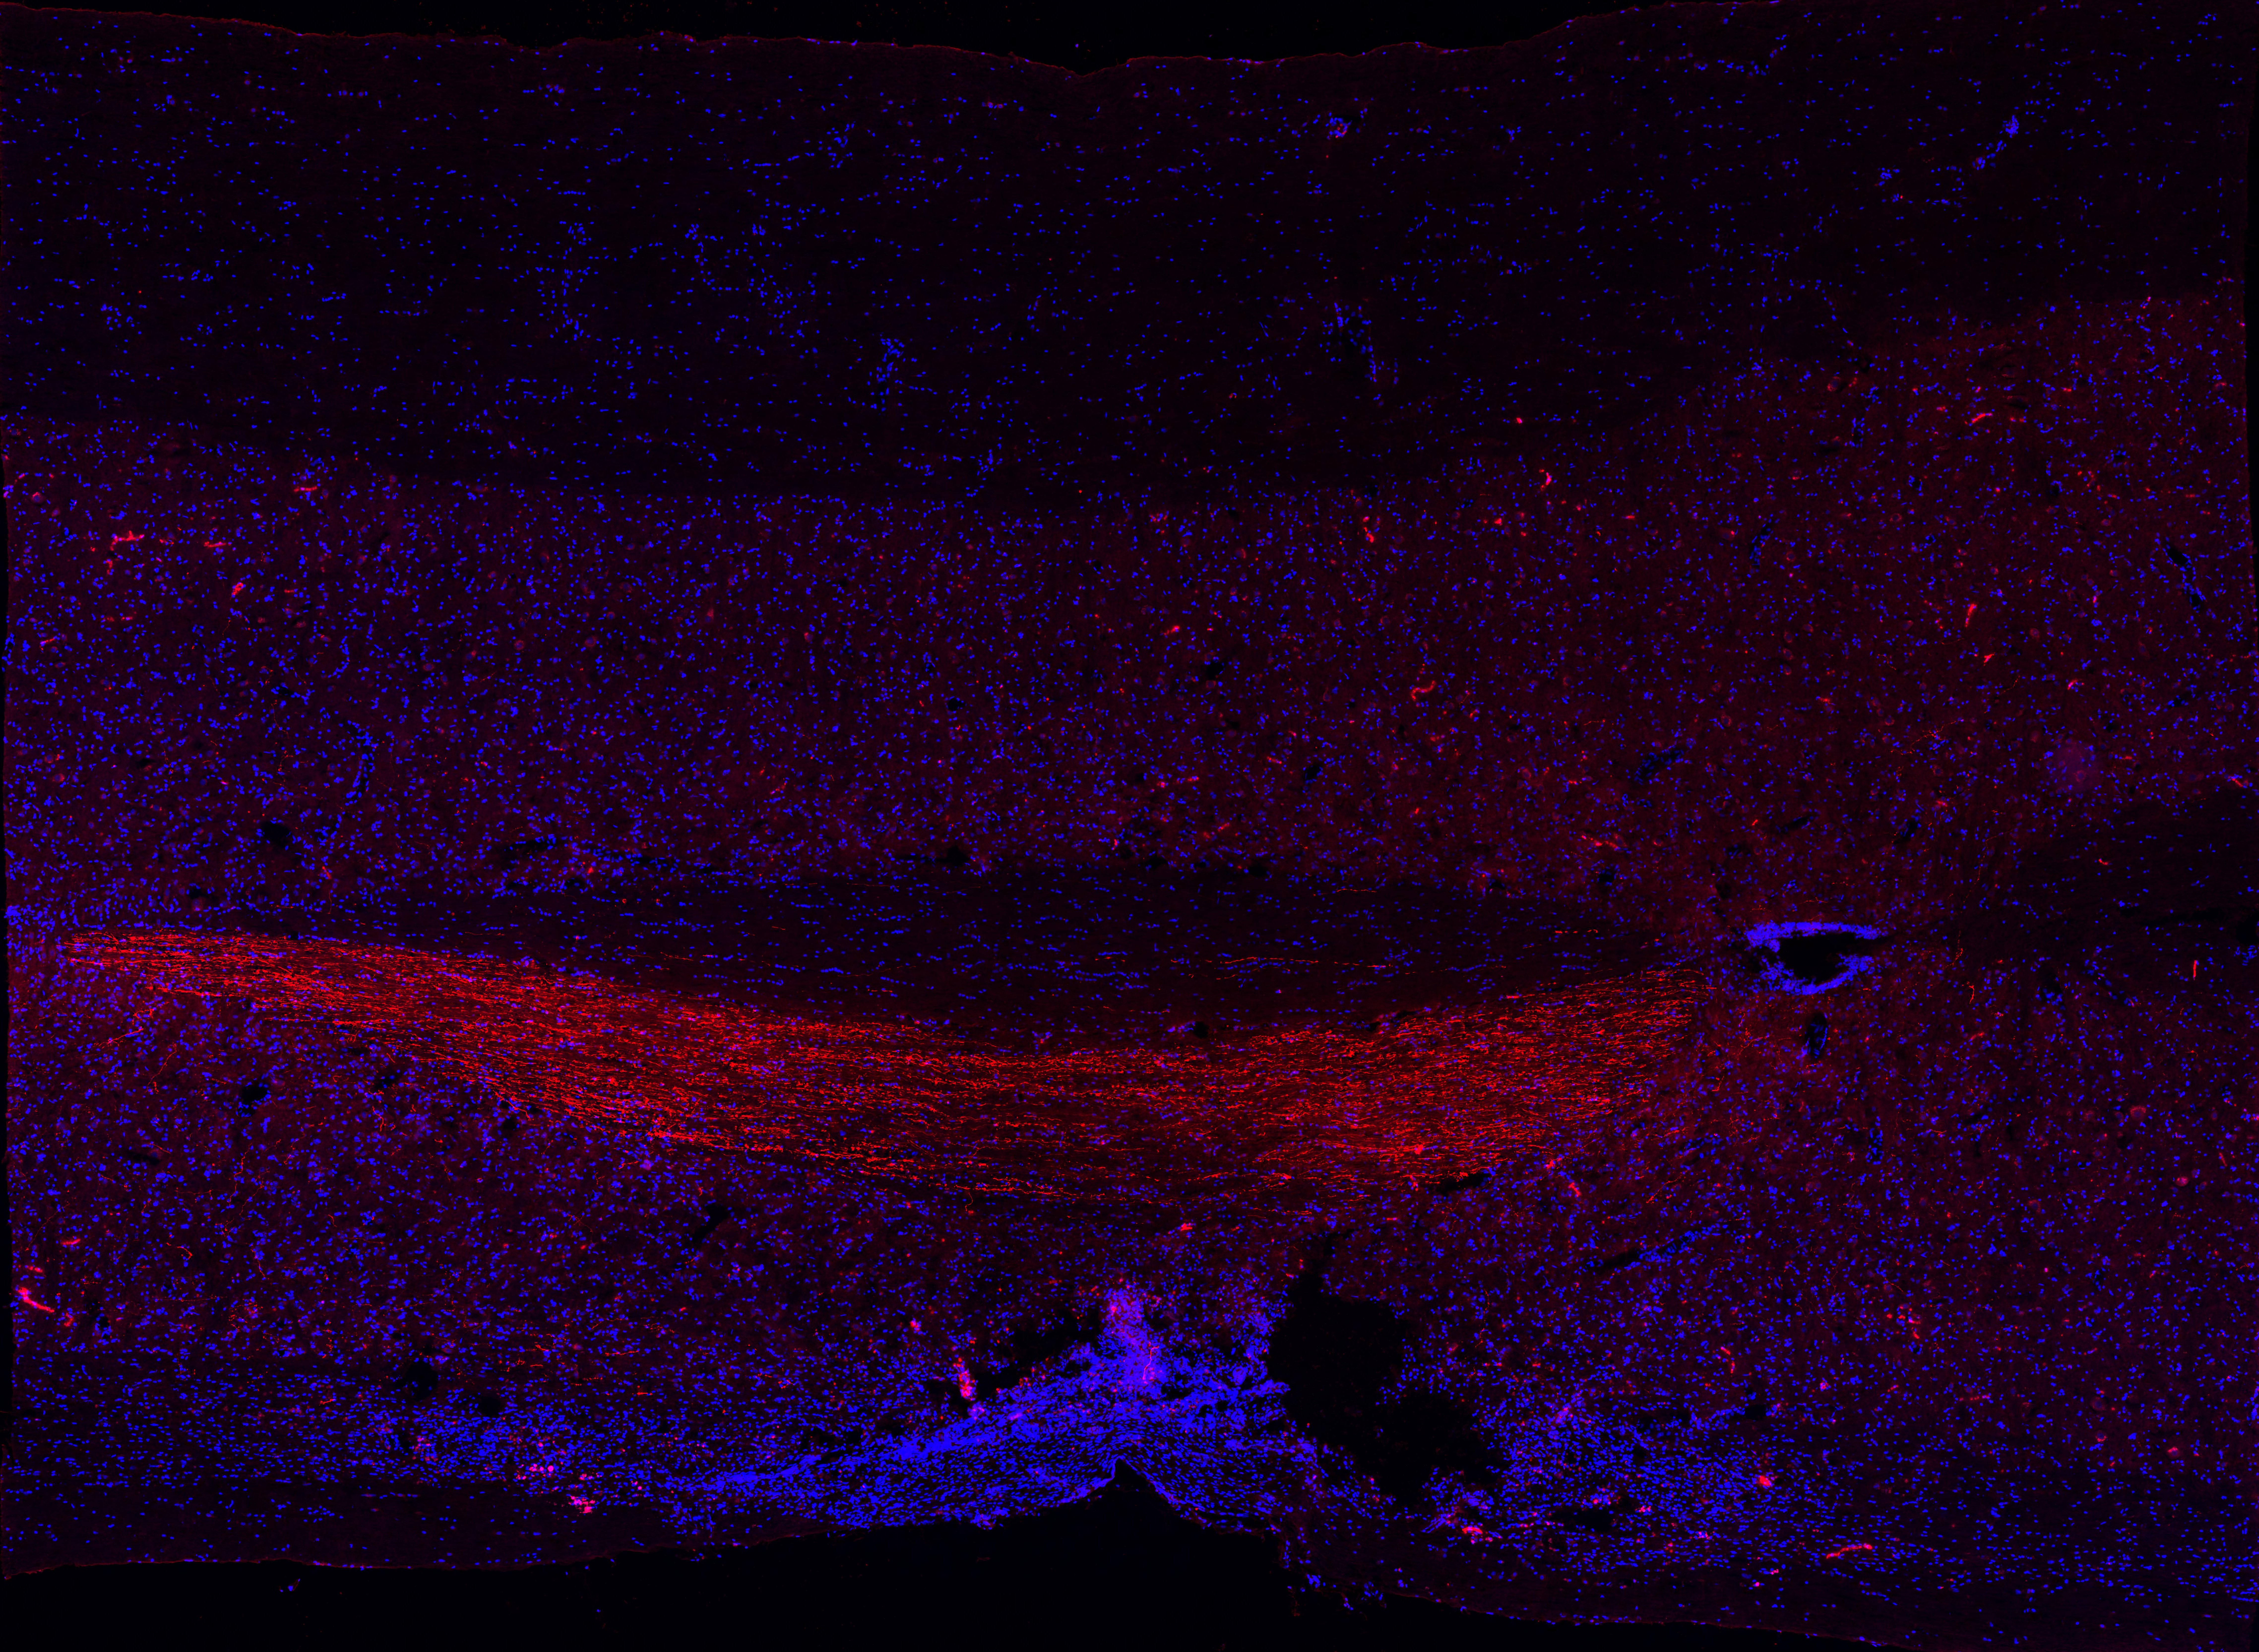 Stained and illuminated neurons